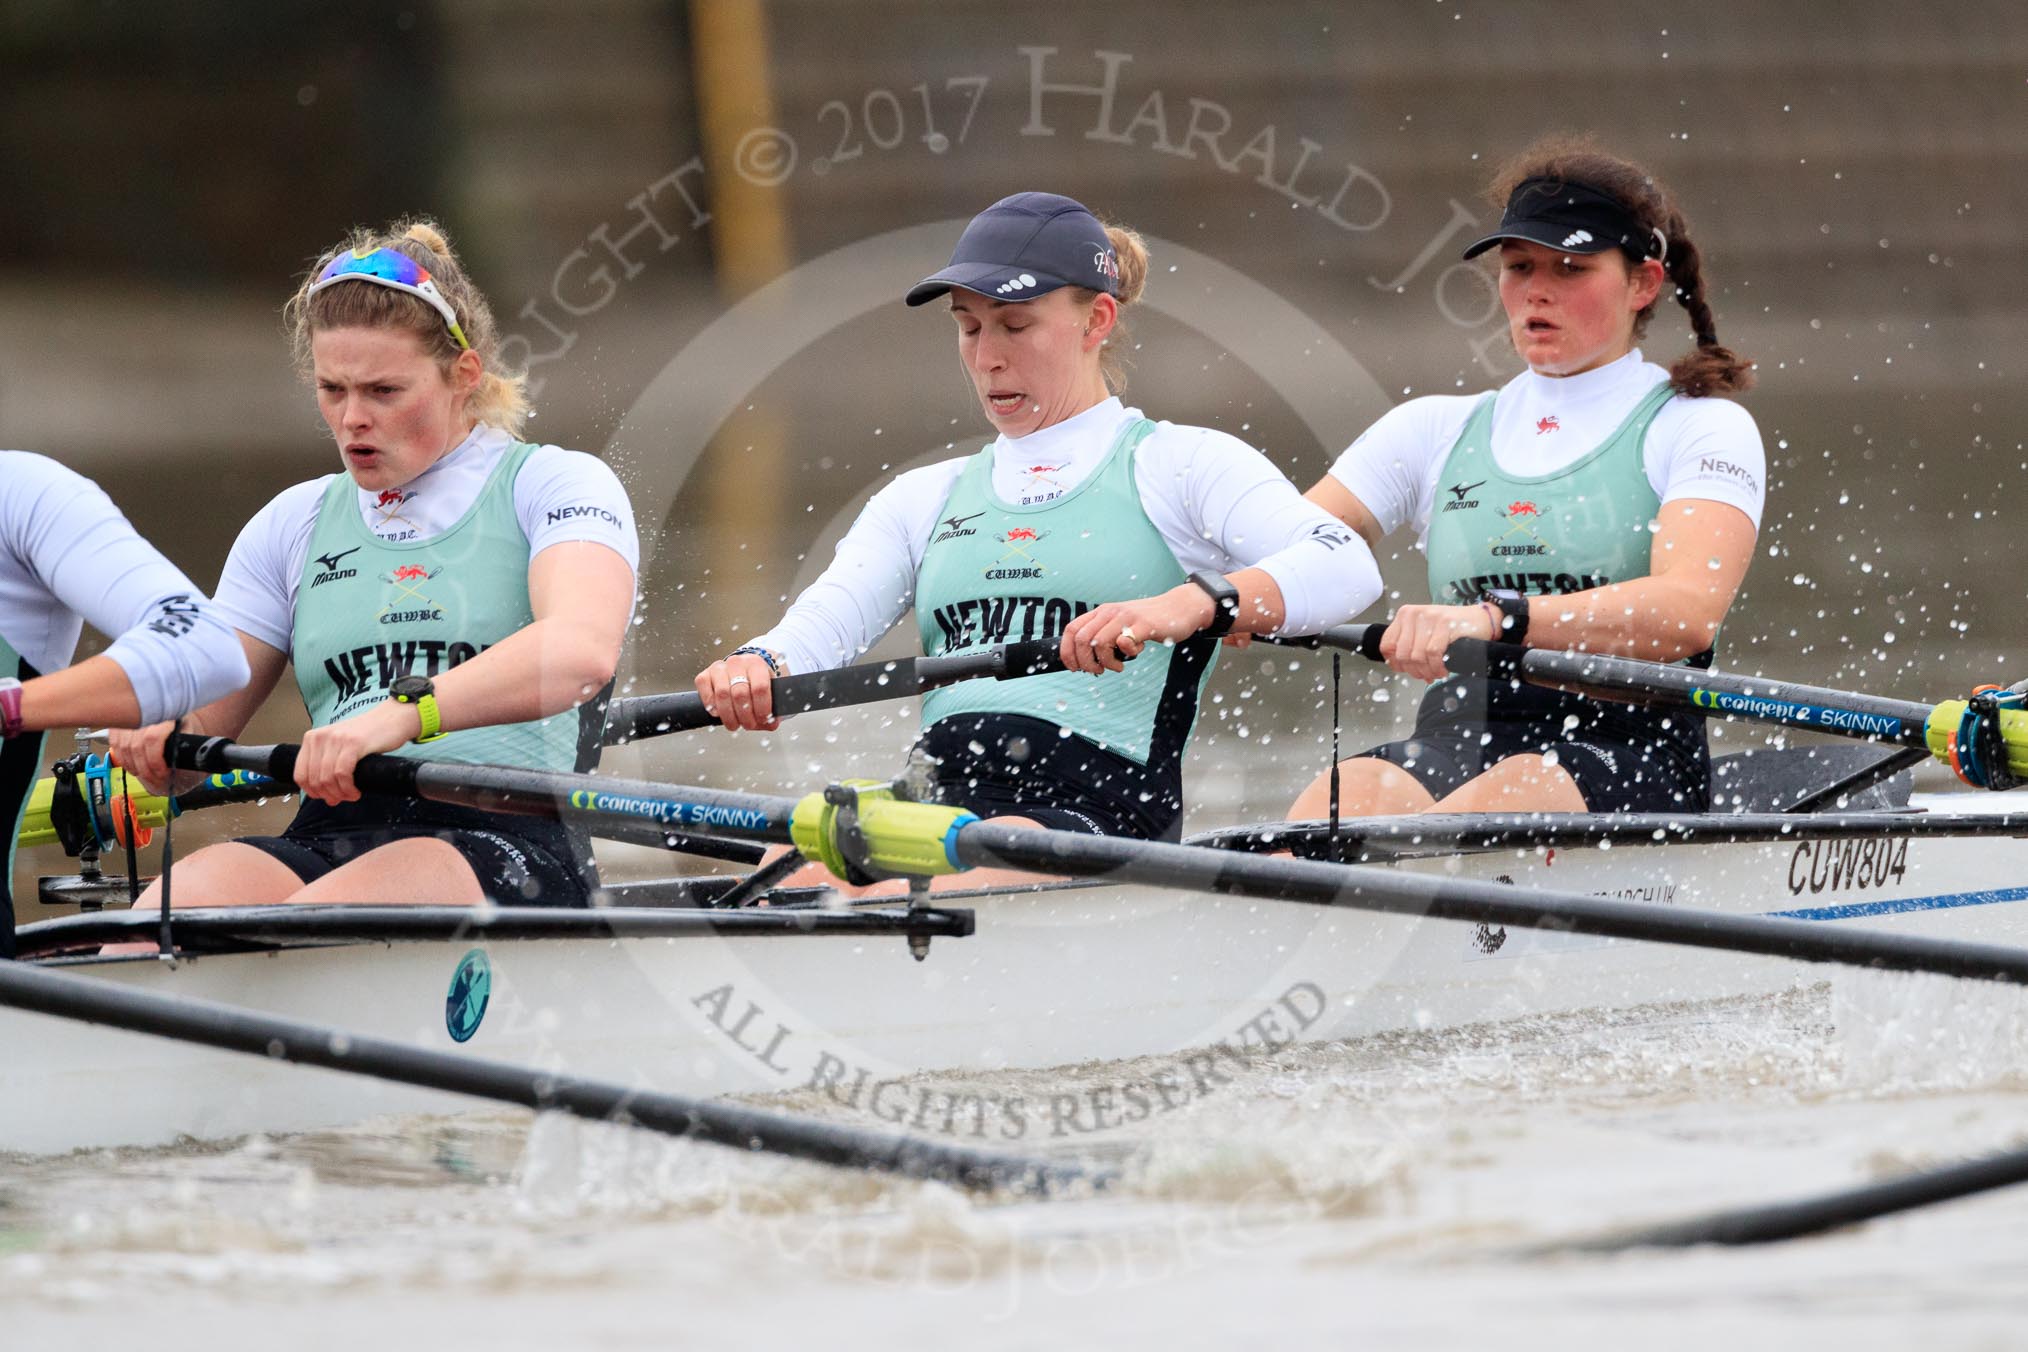 The Boat Race season 2018 - Women's Boat Race Trial Eights (CUWBC, Cambridge): Expecto Patronum  near Hammersmith Bridge, here 4 Laura Foster, 3 Sally O Brien, 2 Millie Perrin, bow Eve Caroe.
River Thames between Putney Bridge and Mortlake,
London SW15,

United Kingdom,
on 05 December 2017 at 12:48, image #96